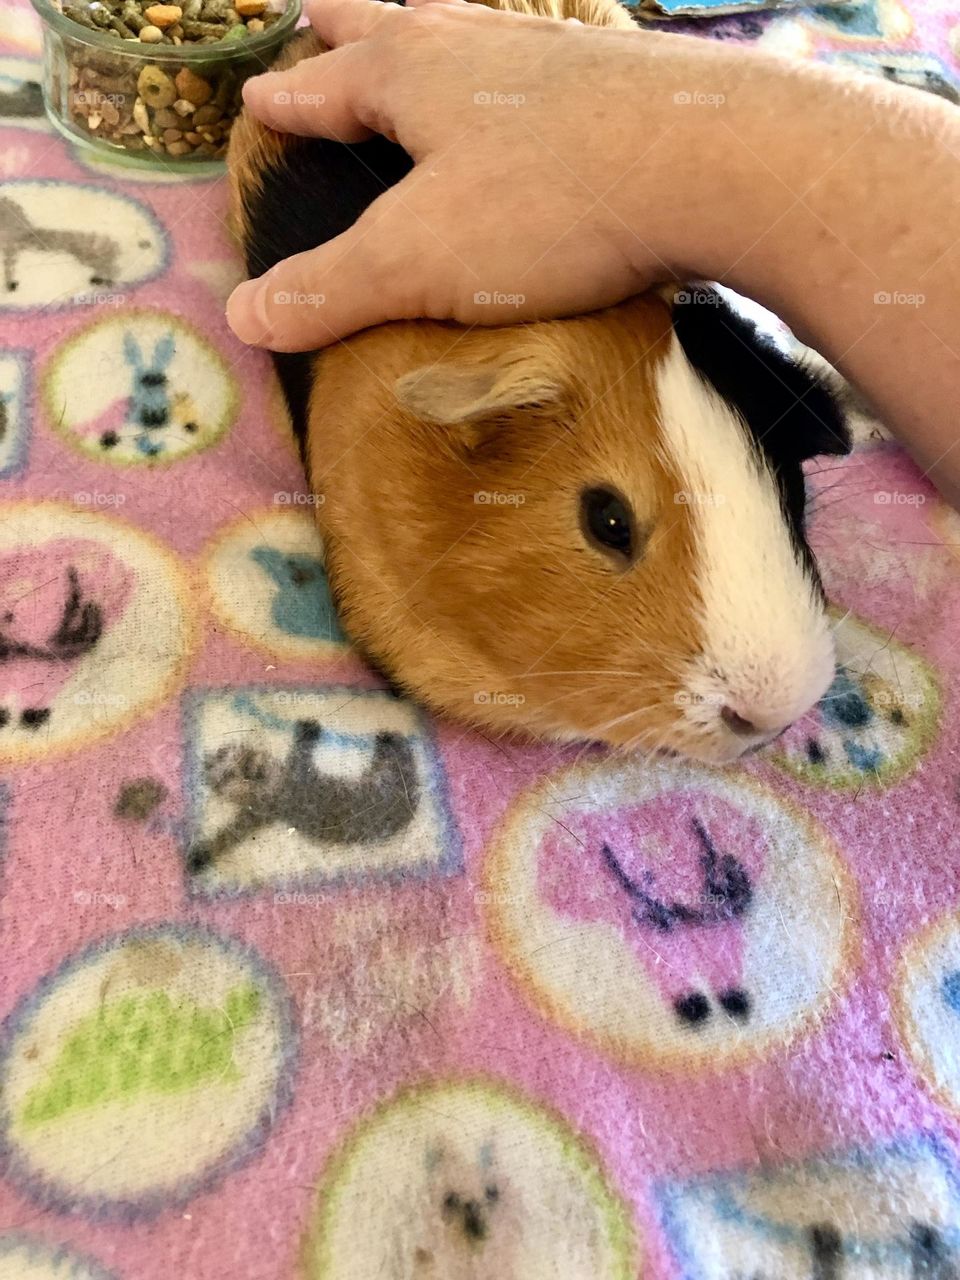 Very chill relaxed Guinea pig 